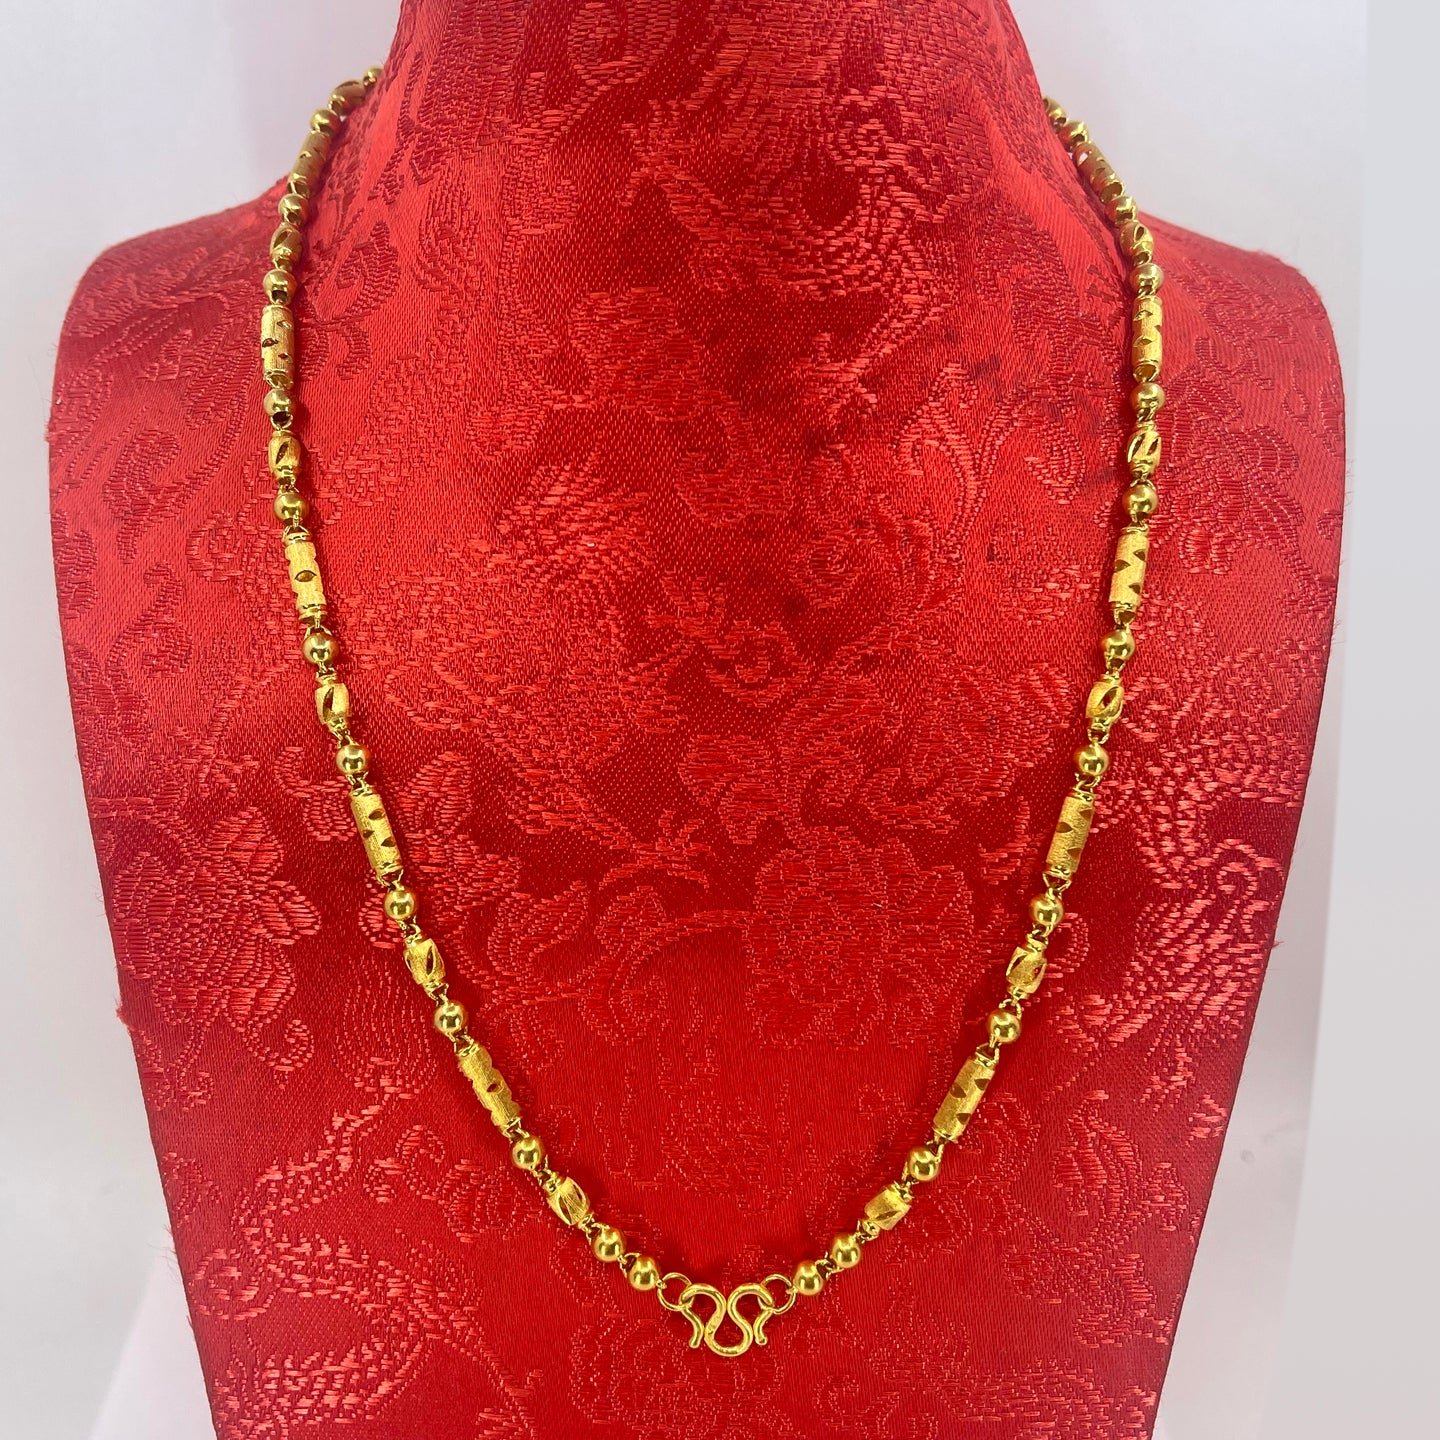 24K Solid Yellow Gold Barrel Bead Link Chain 21 Grams 20